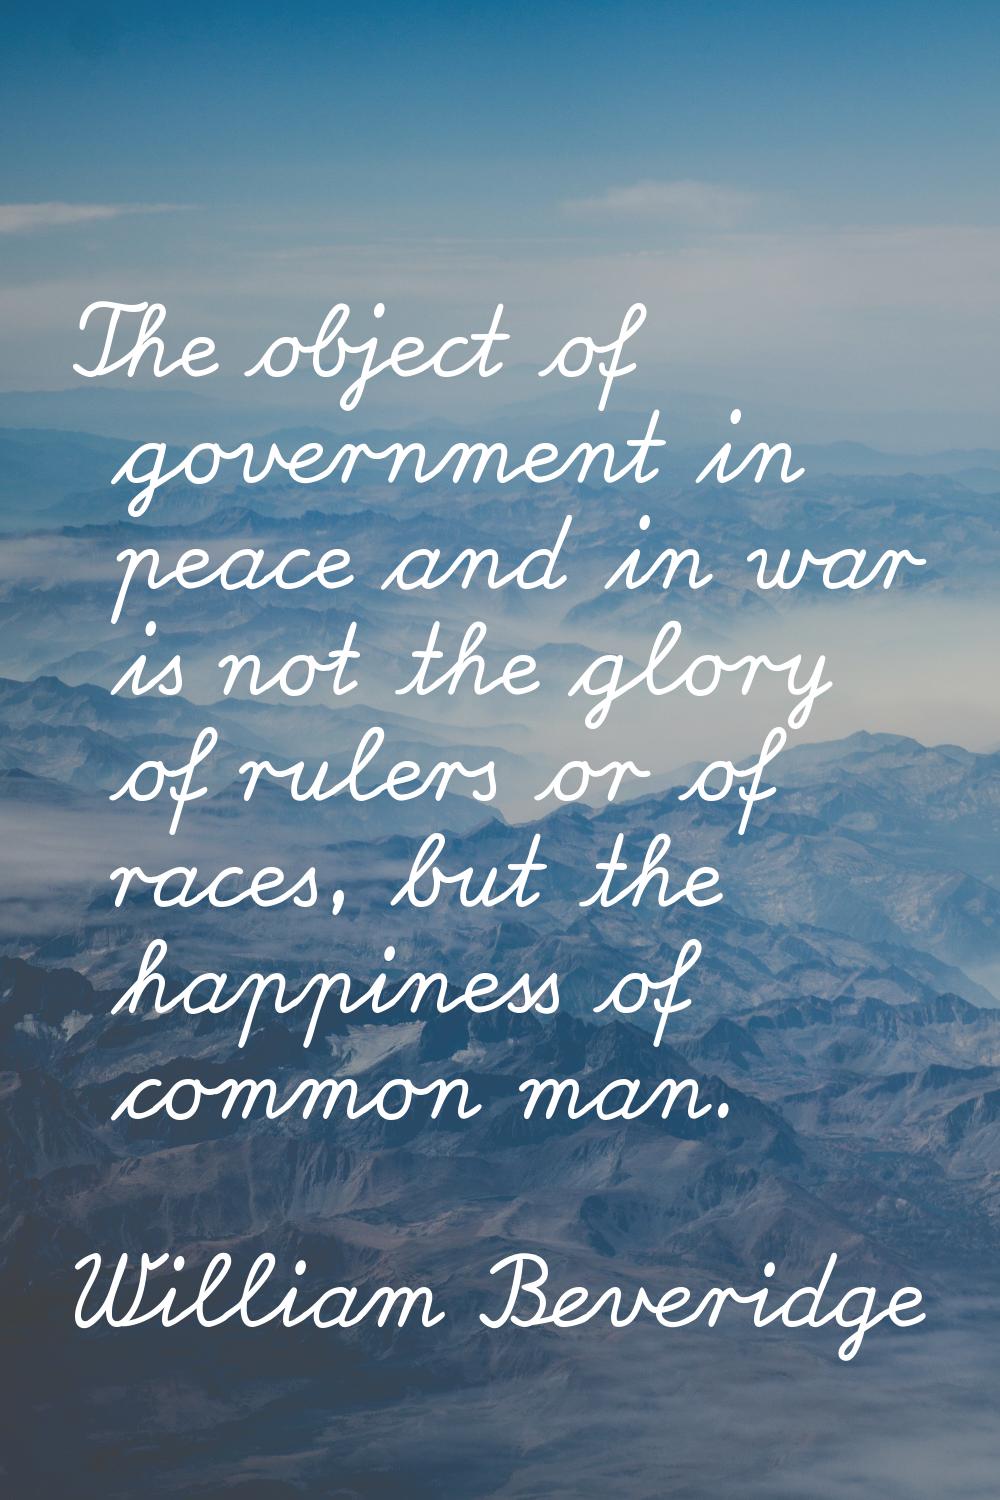 The object of government in peace and in war is not the glory of rulers or of races, but the happin